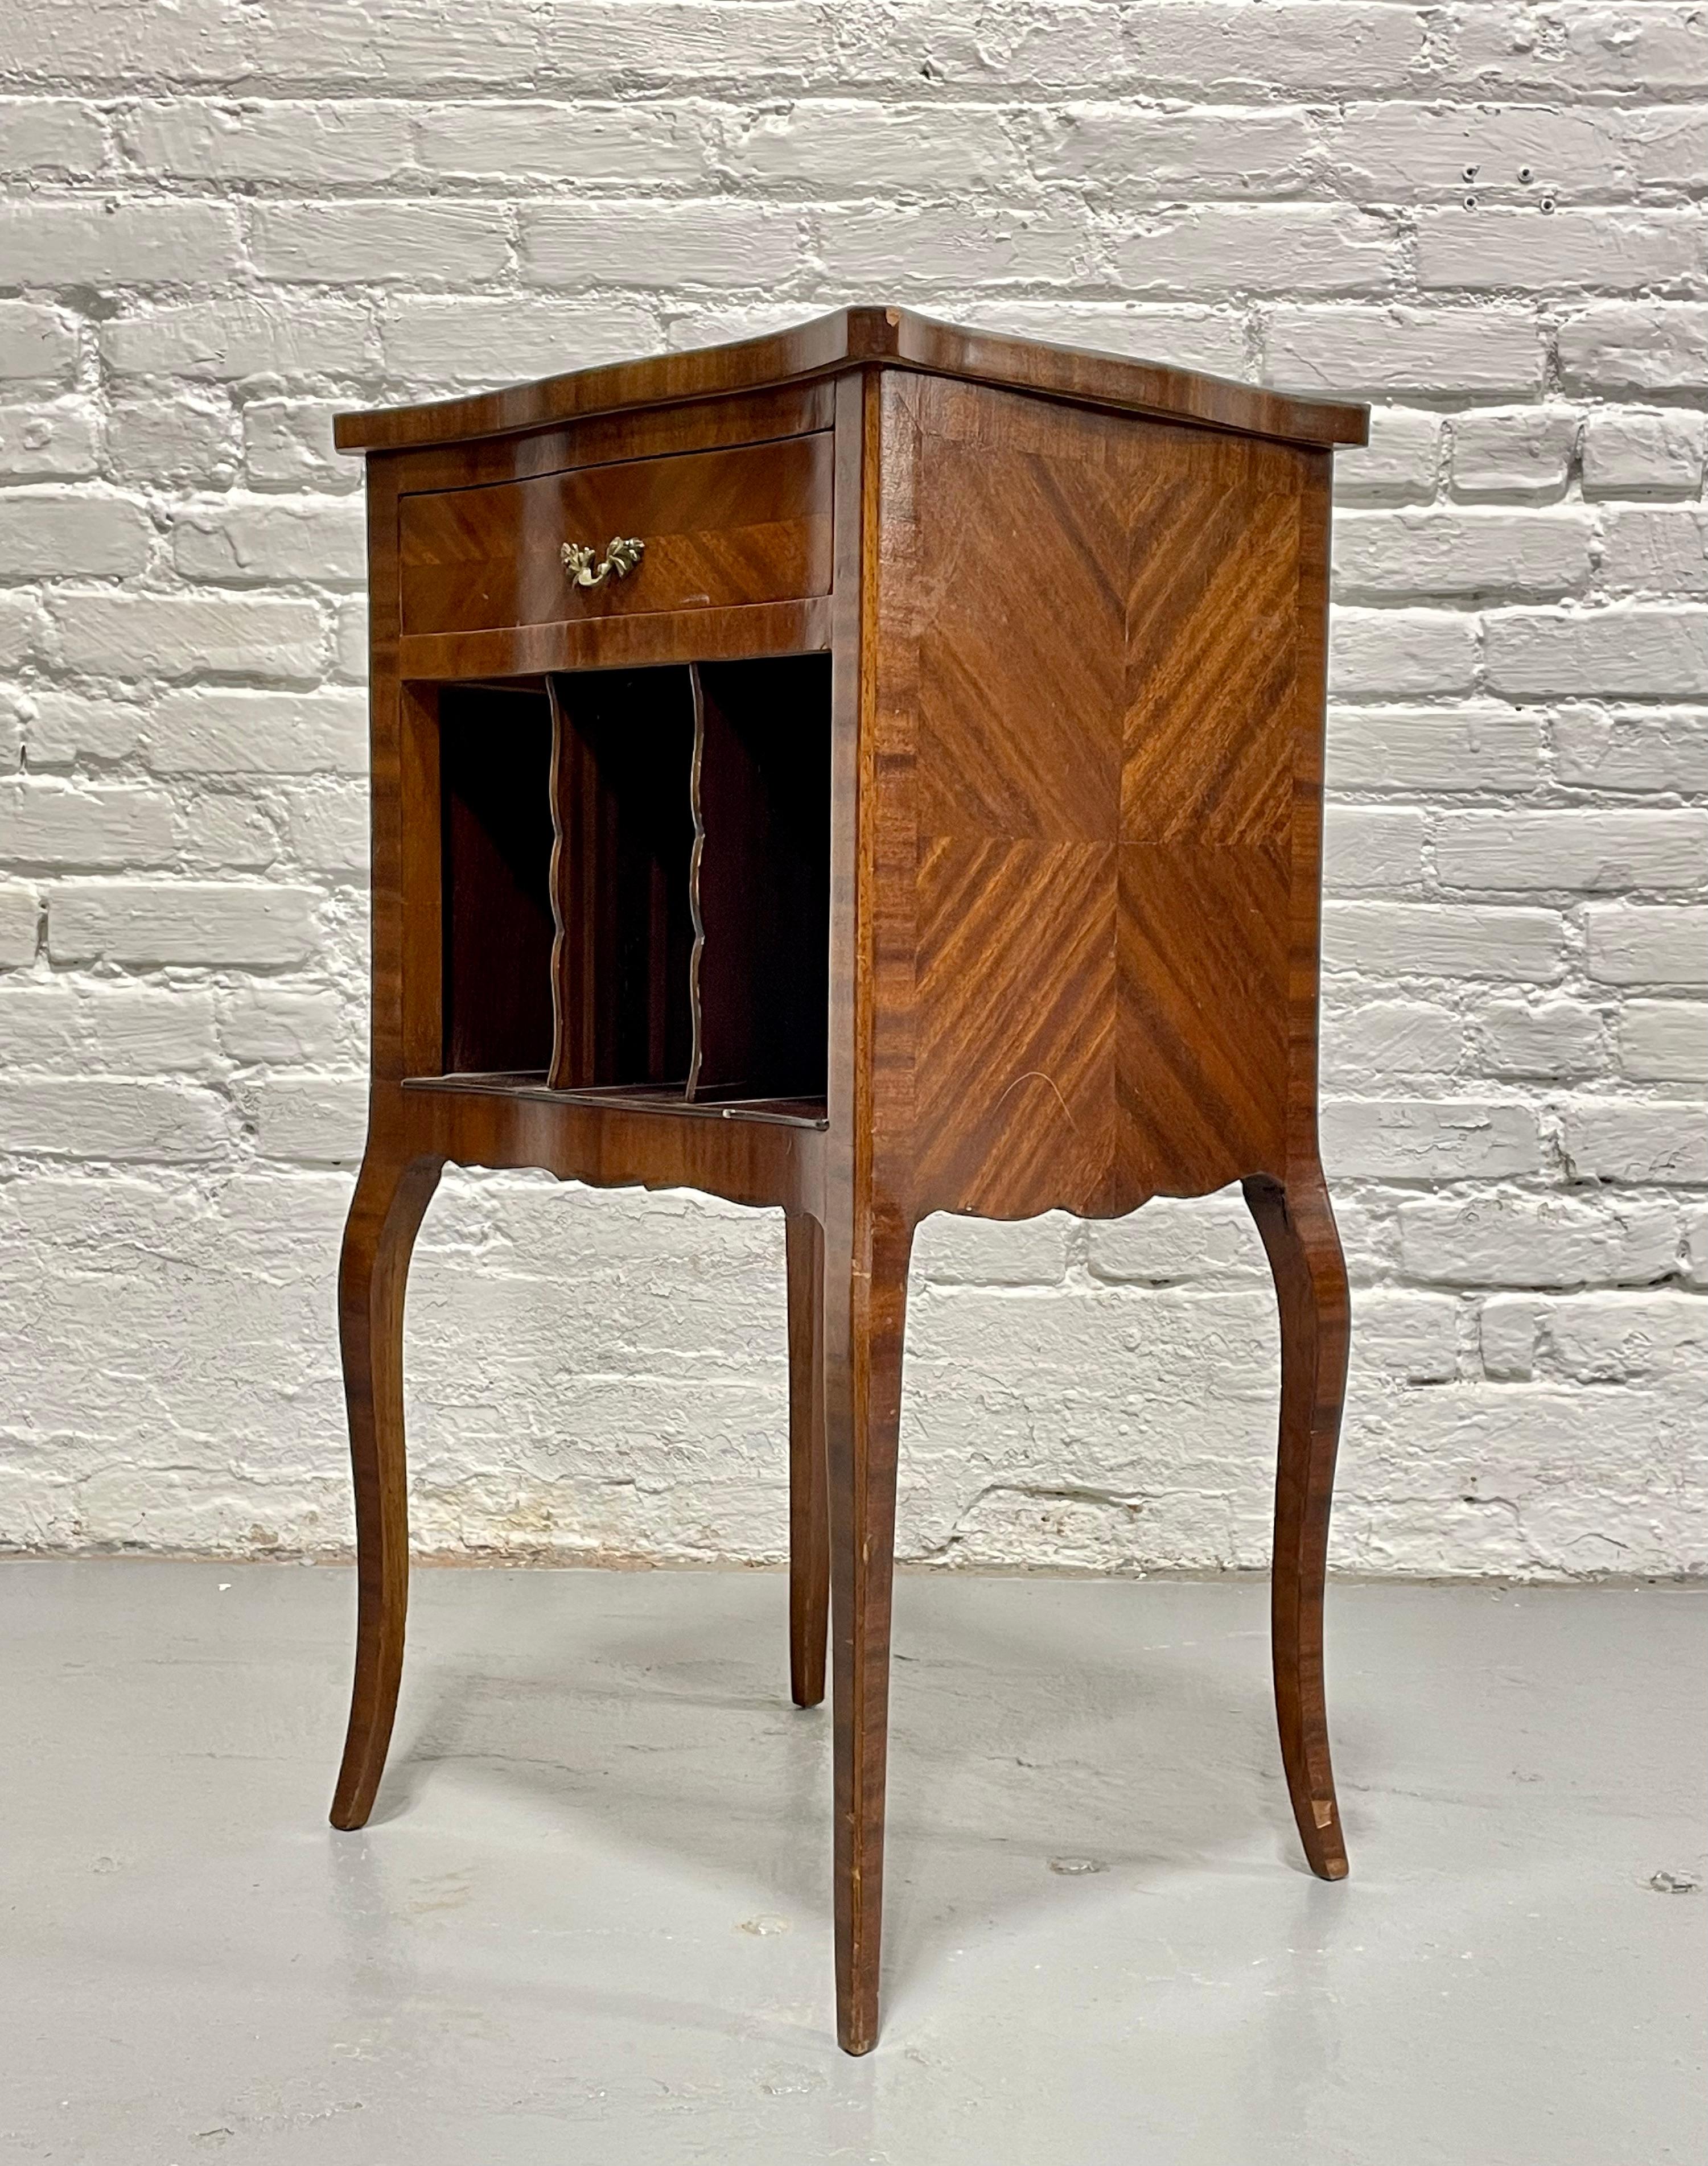 A fantastic little French Marquetry Bedside Table with gorgeous bookmatched wood detailing along each side and across the tabletop. The layout offers a dovetailed drawer and three partitioned spaces below, perfect for displaying books and magazines